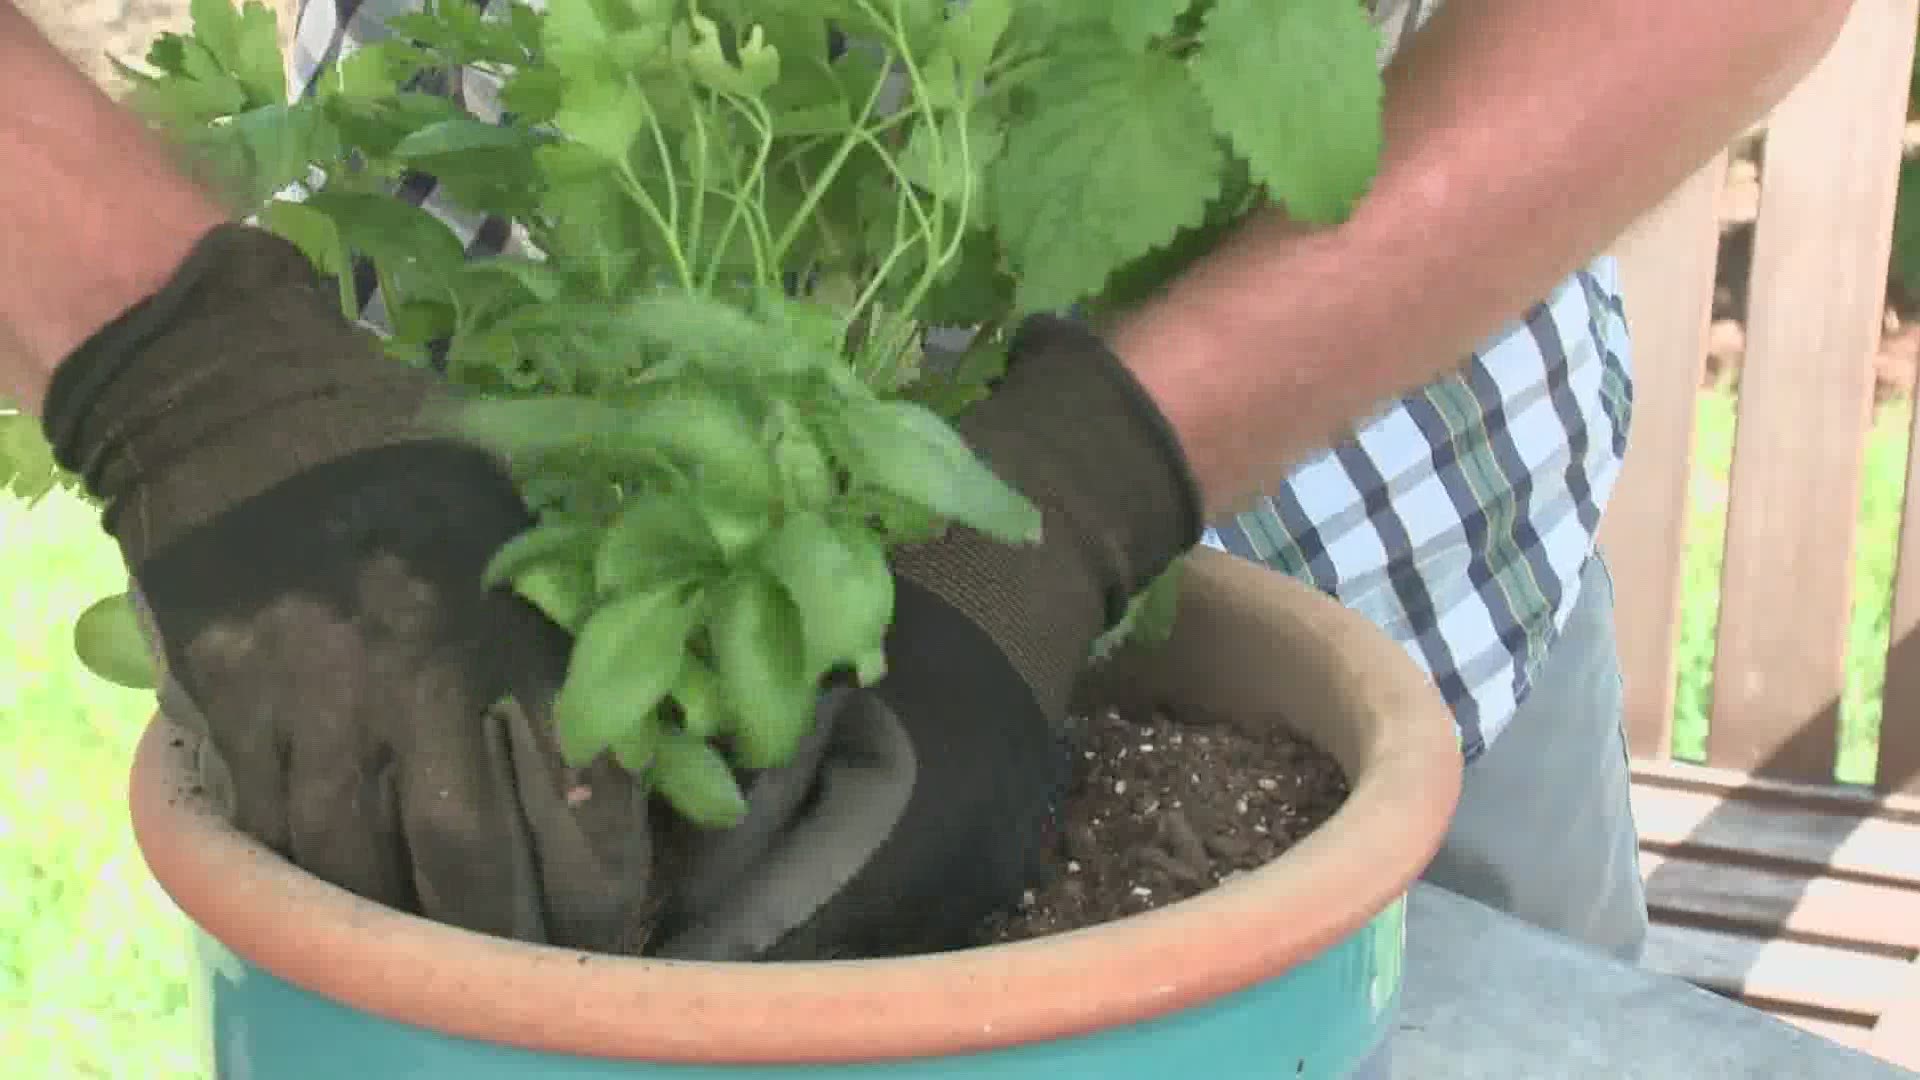 Master Gardener Chris Pezzullo shows us how to plants herbs and keep them growing